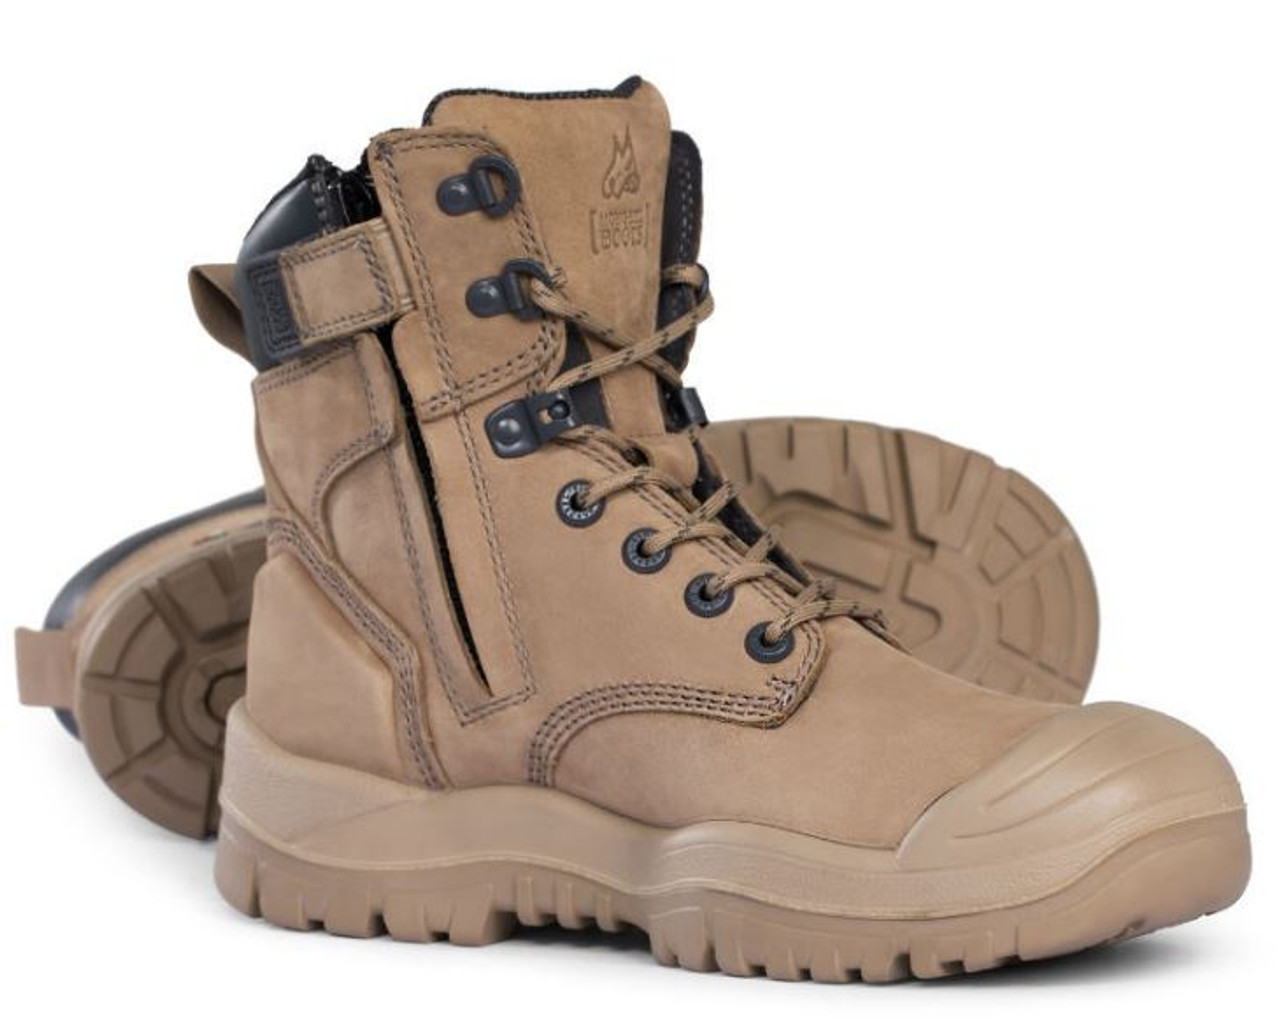 safety work boots with side zipper